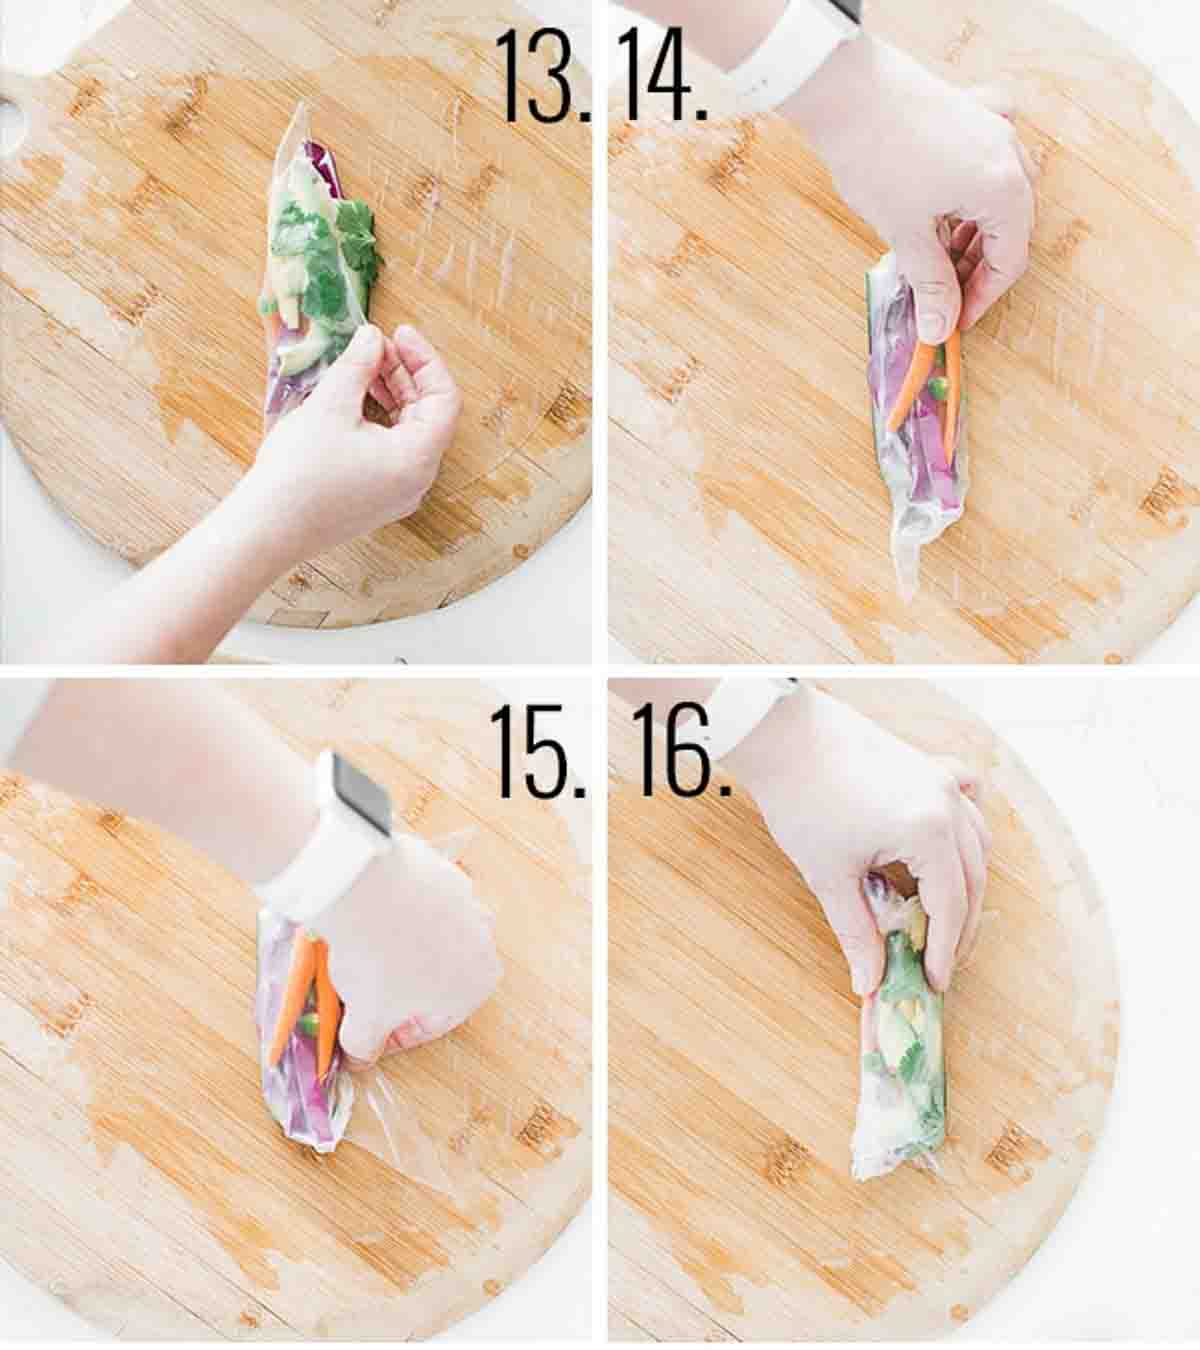 A collage of images showing how to roll rice paper rolls.